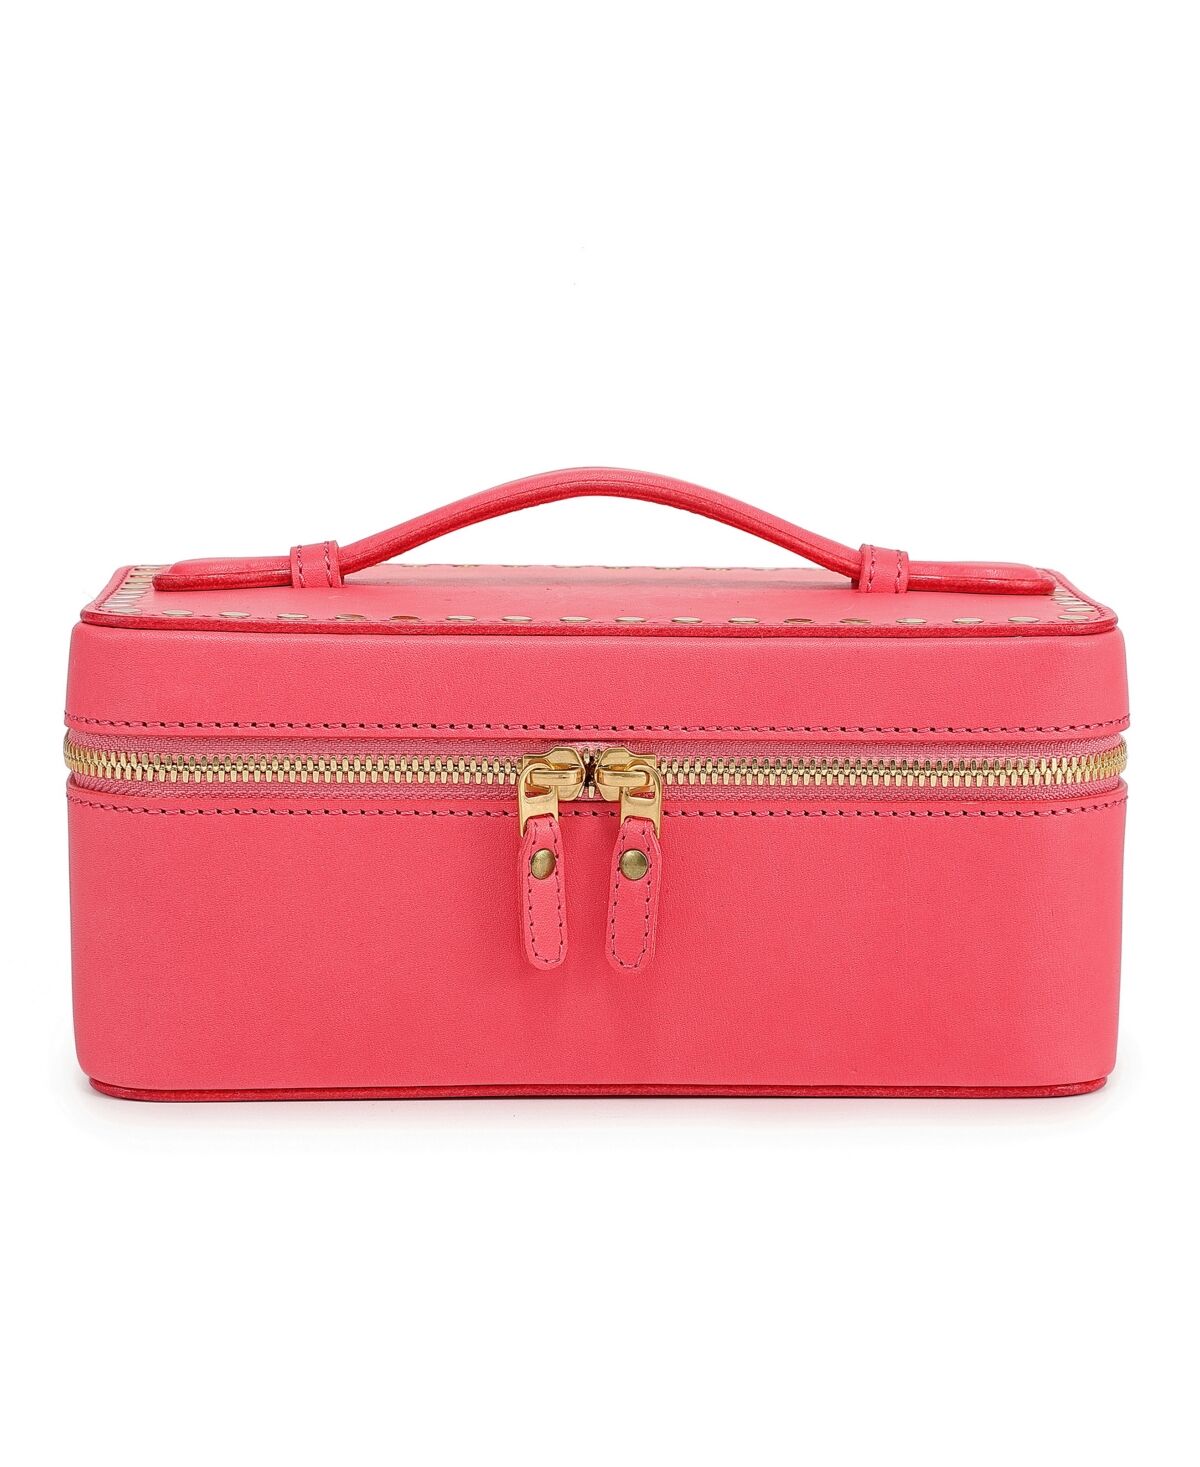 Old Trend Clivia Travel Leather Beauty Box - Pink